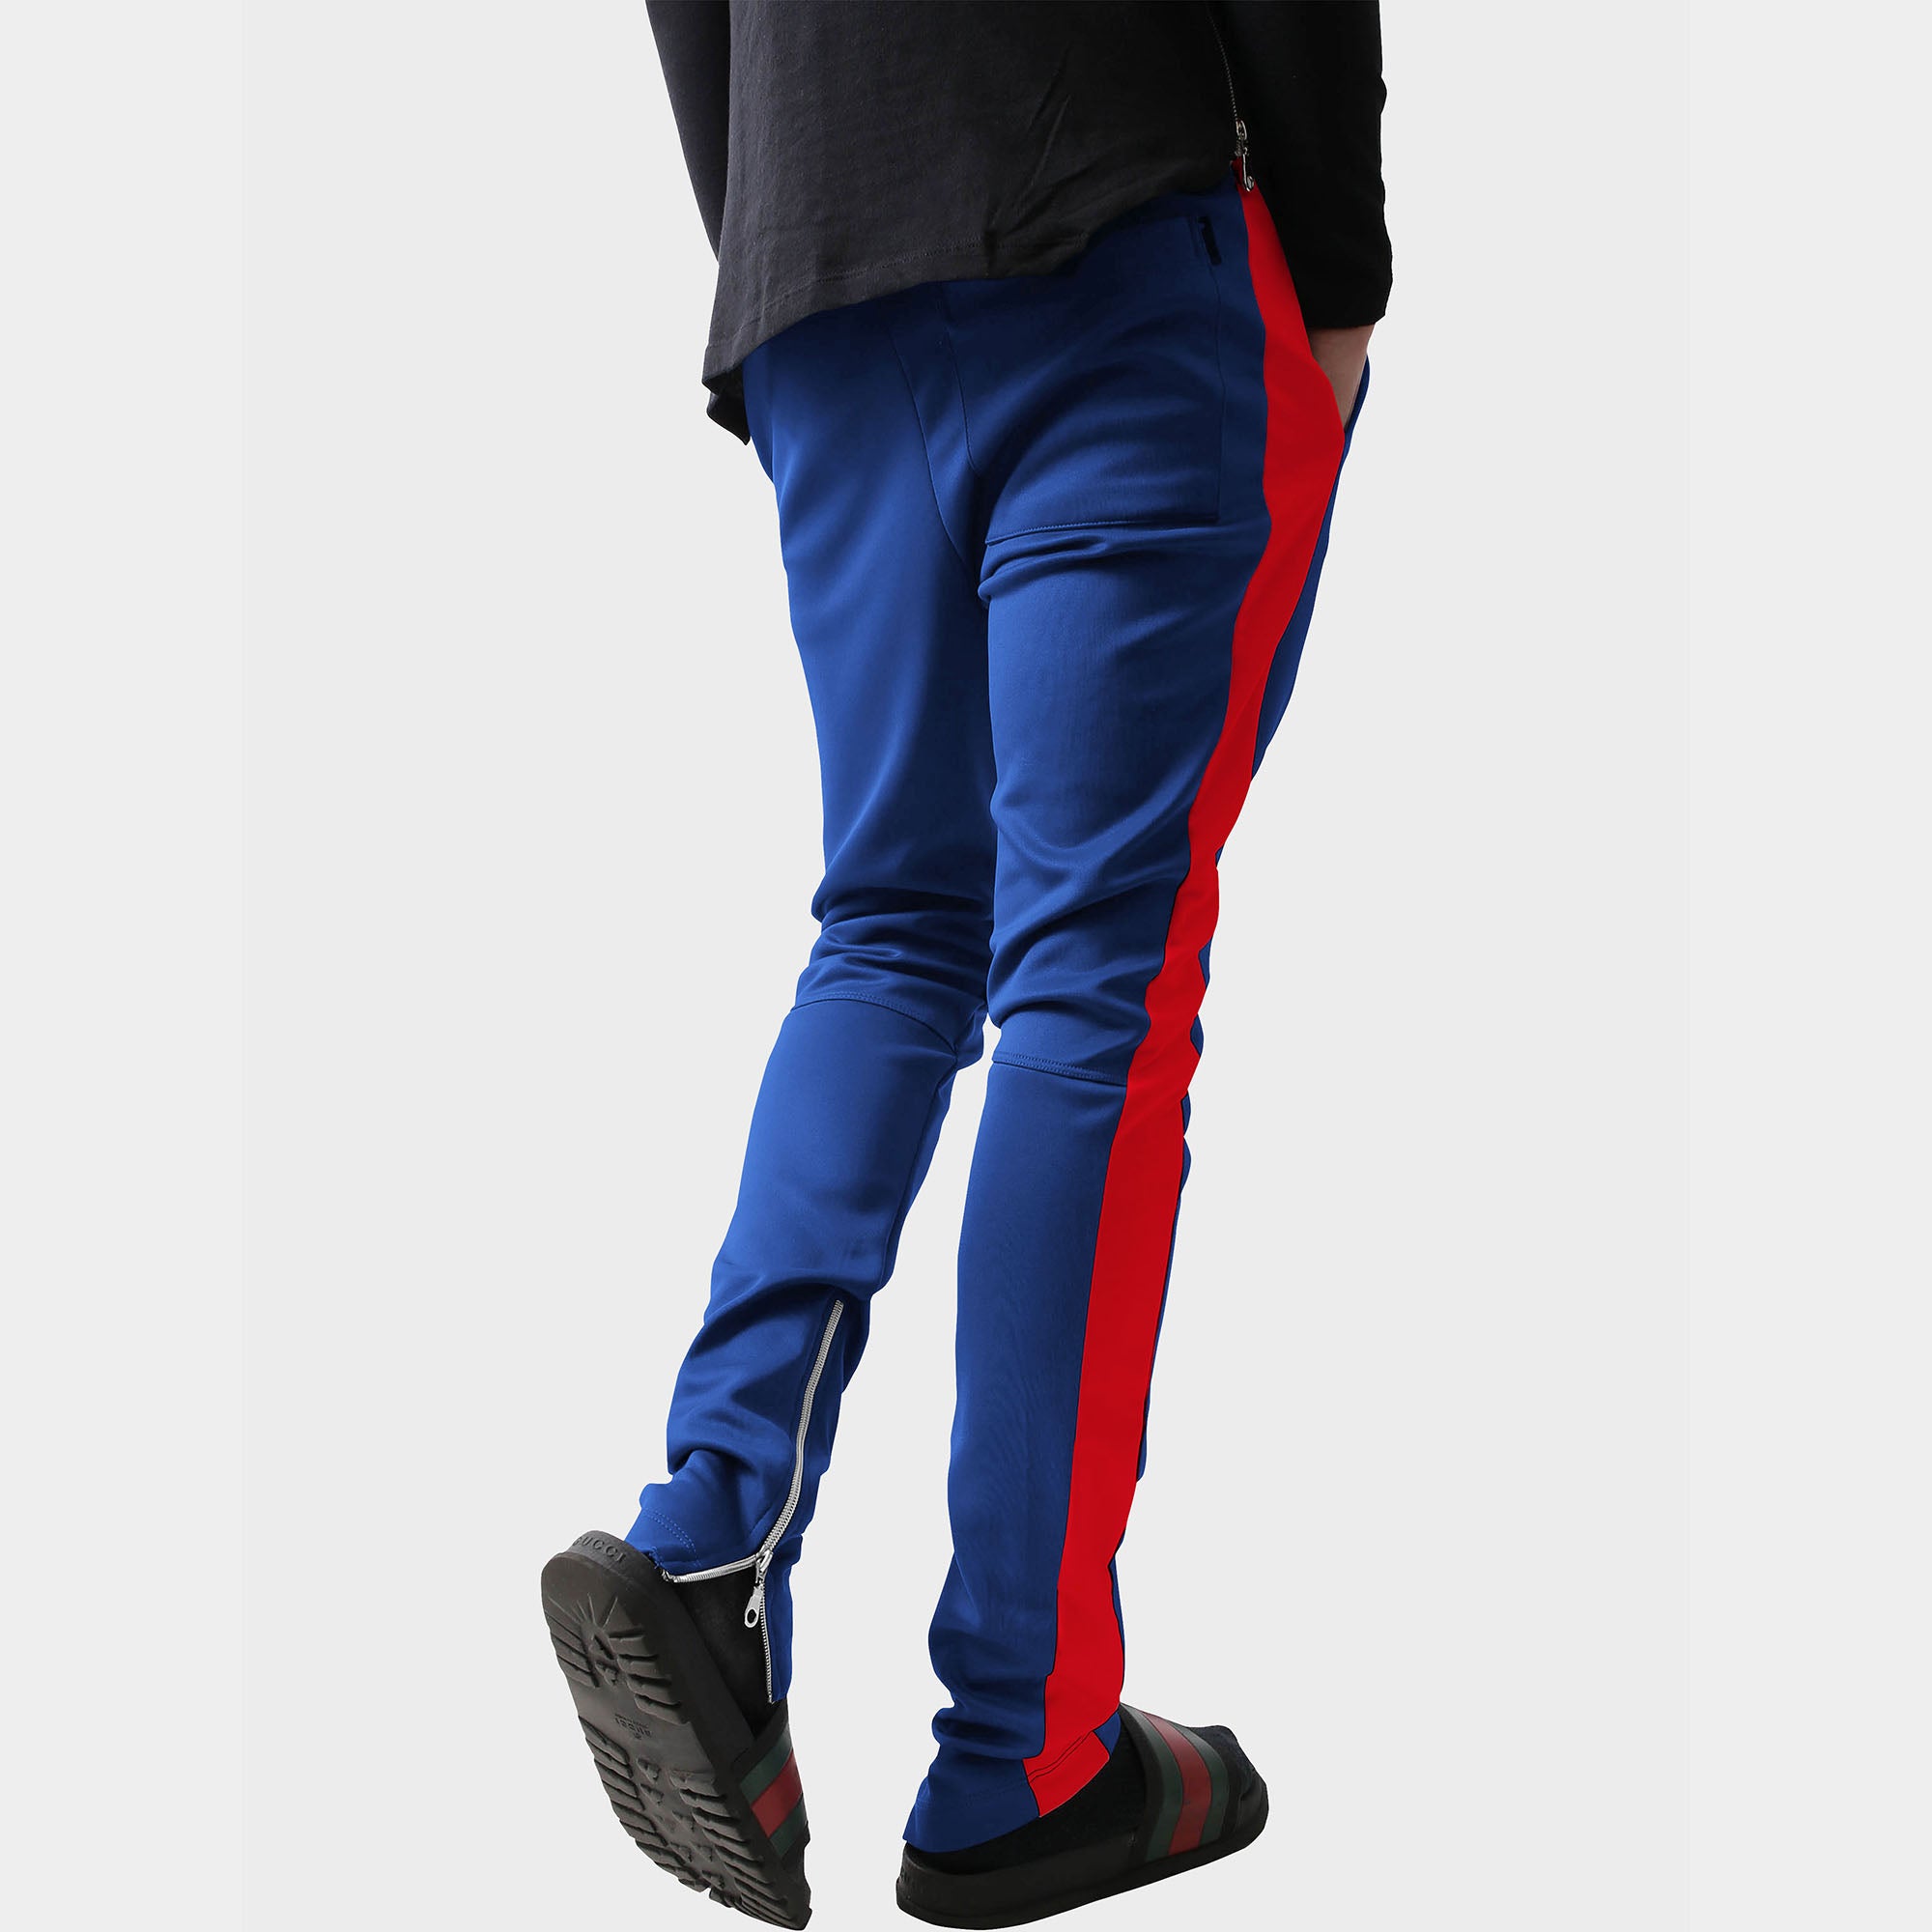 jogger_striped joggers_striped sweatpants_velvet joggers mens_sweatpants_side stripe joggers mens_champion sweatpants_champion joggers_mens joggers_Royal Blue/Red